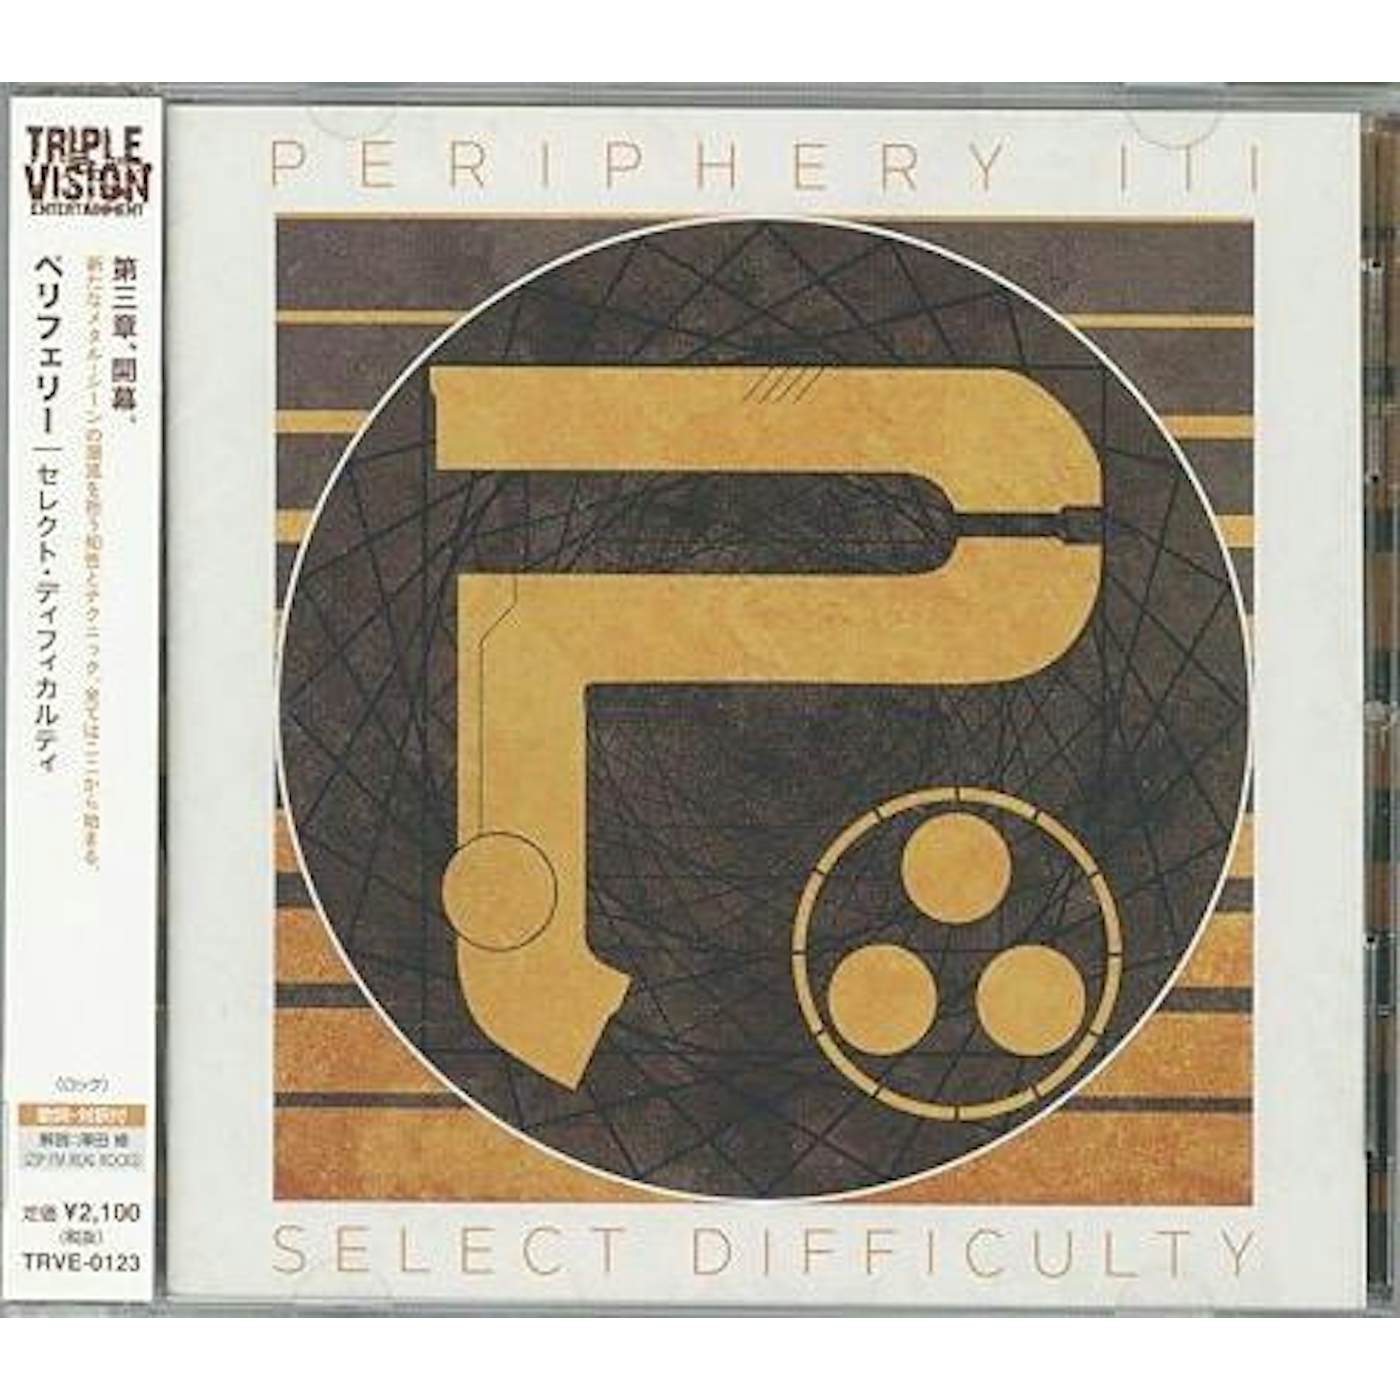 PERIPHERY 3: SELECT DIFFICULTY CD